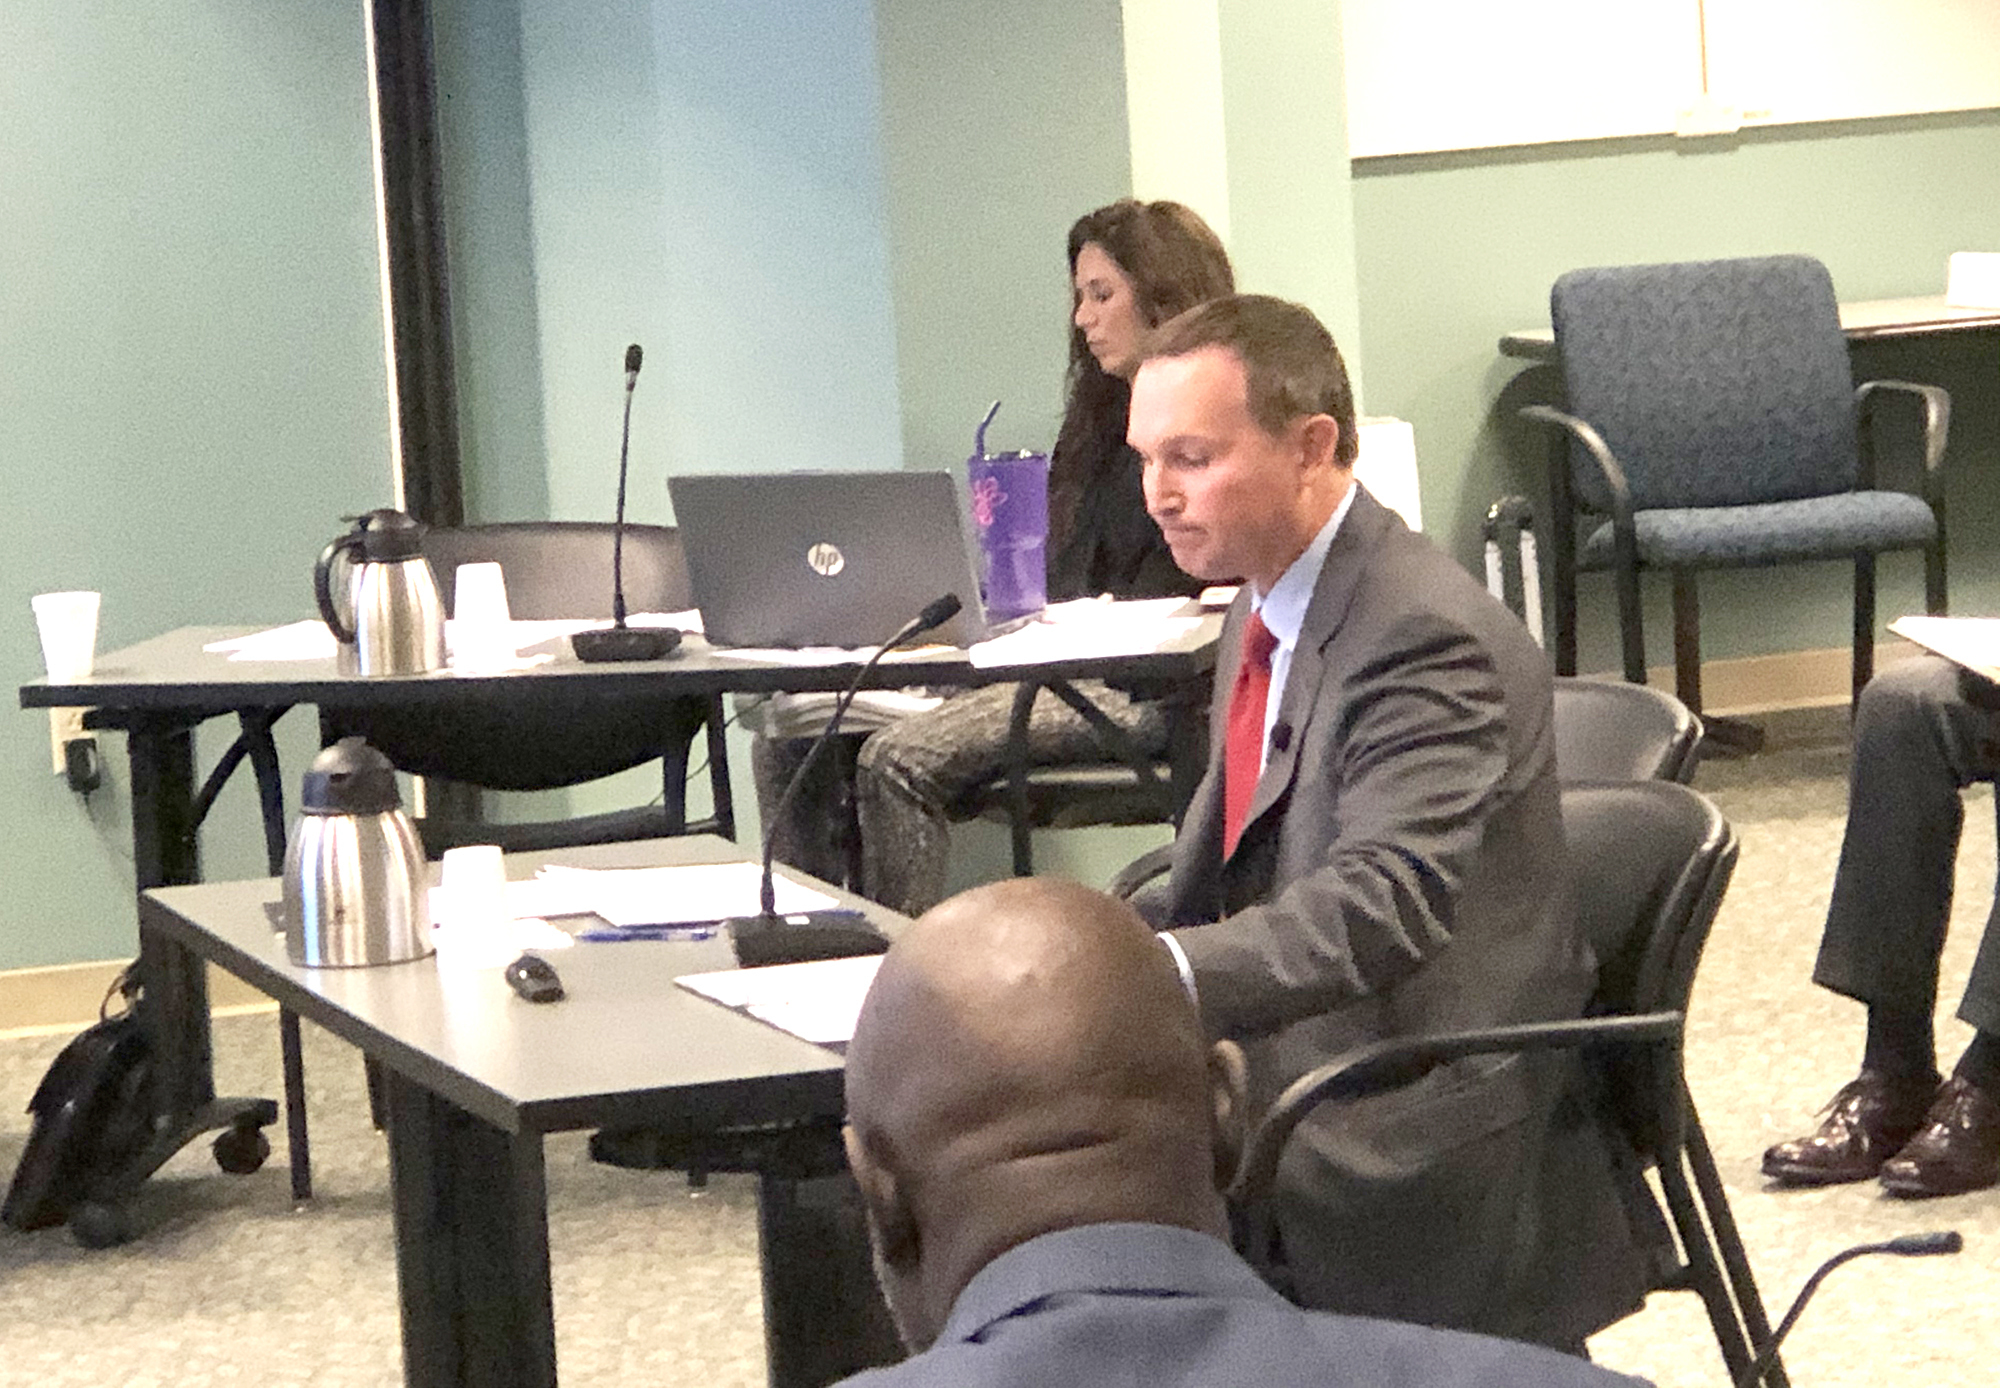 Mayor Curry unexpectedly addresses the Council, stating his support of the invitation to negotiate Nov. 25.